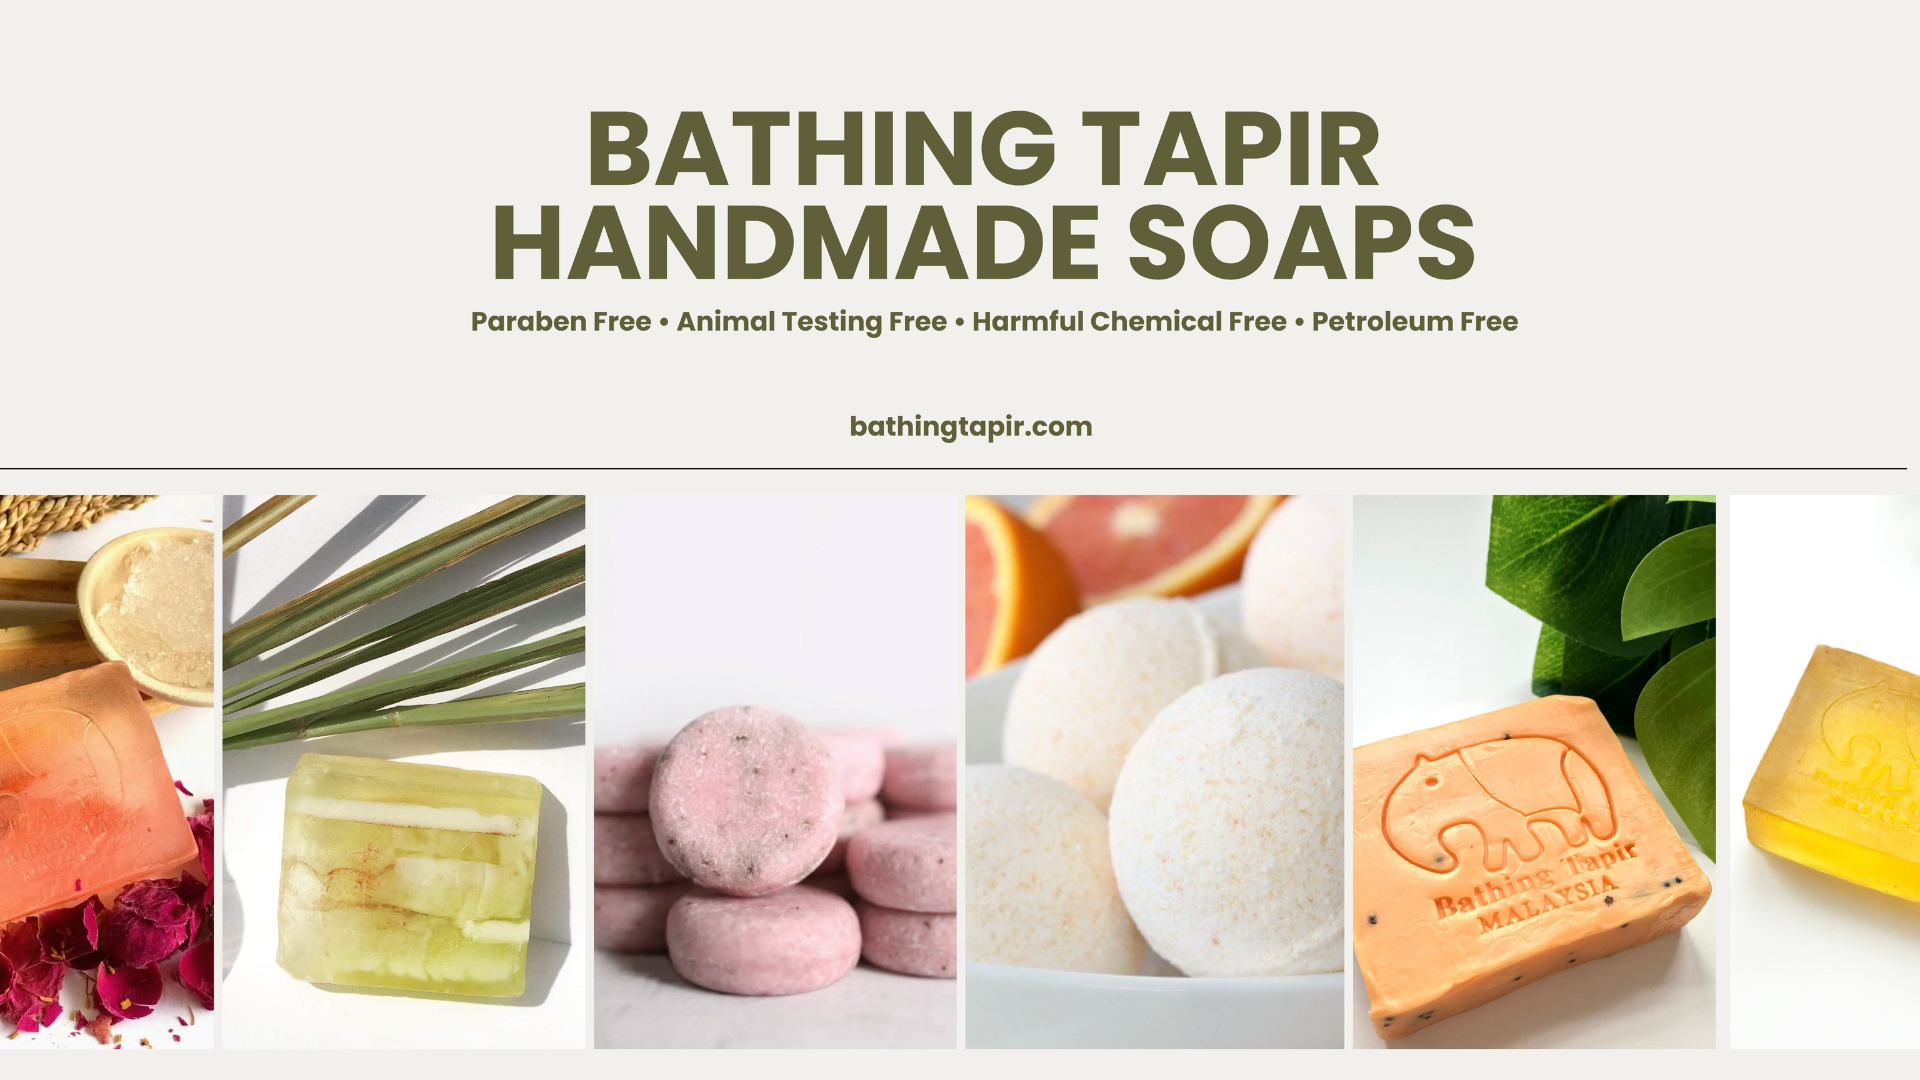 Enjoy 10% Discount on All Bathing Tapir Products